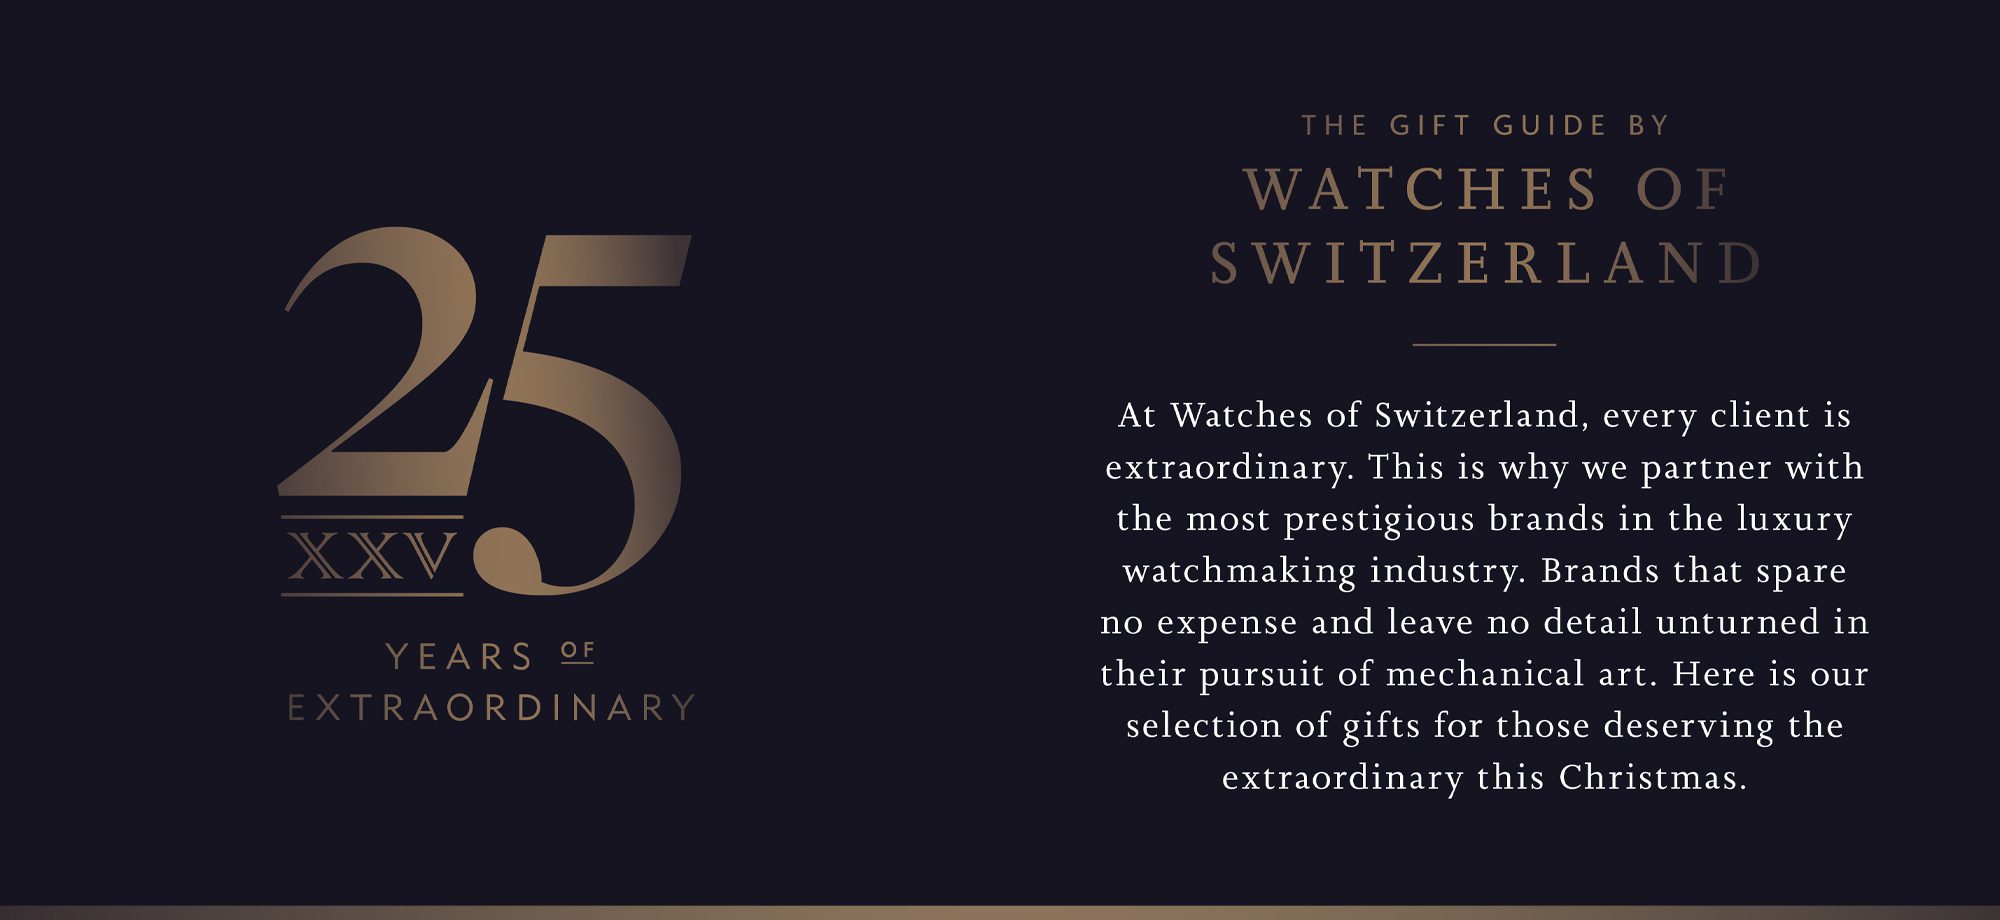 At Watches of Switzerland, every client is extraordinary. This is why we partner with the most prestigious brands in the luxury watchmaking industry. Brands that spare no expense and leave no detail unturned in their pursuit of mechanical art. Here is our selection of gifts for those deserving the extraordinary this Christmas.